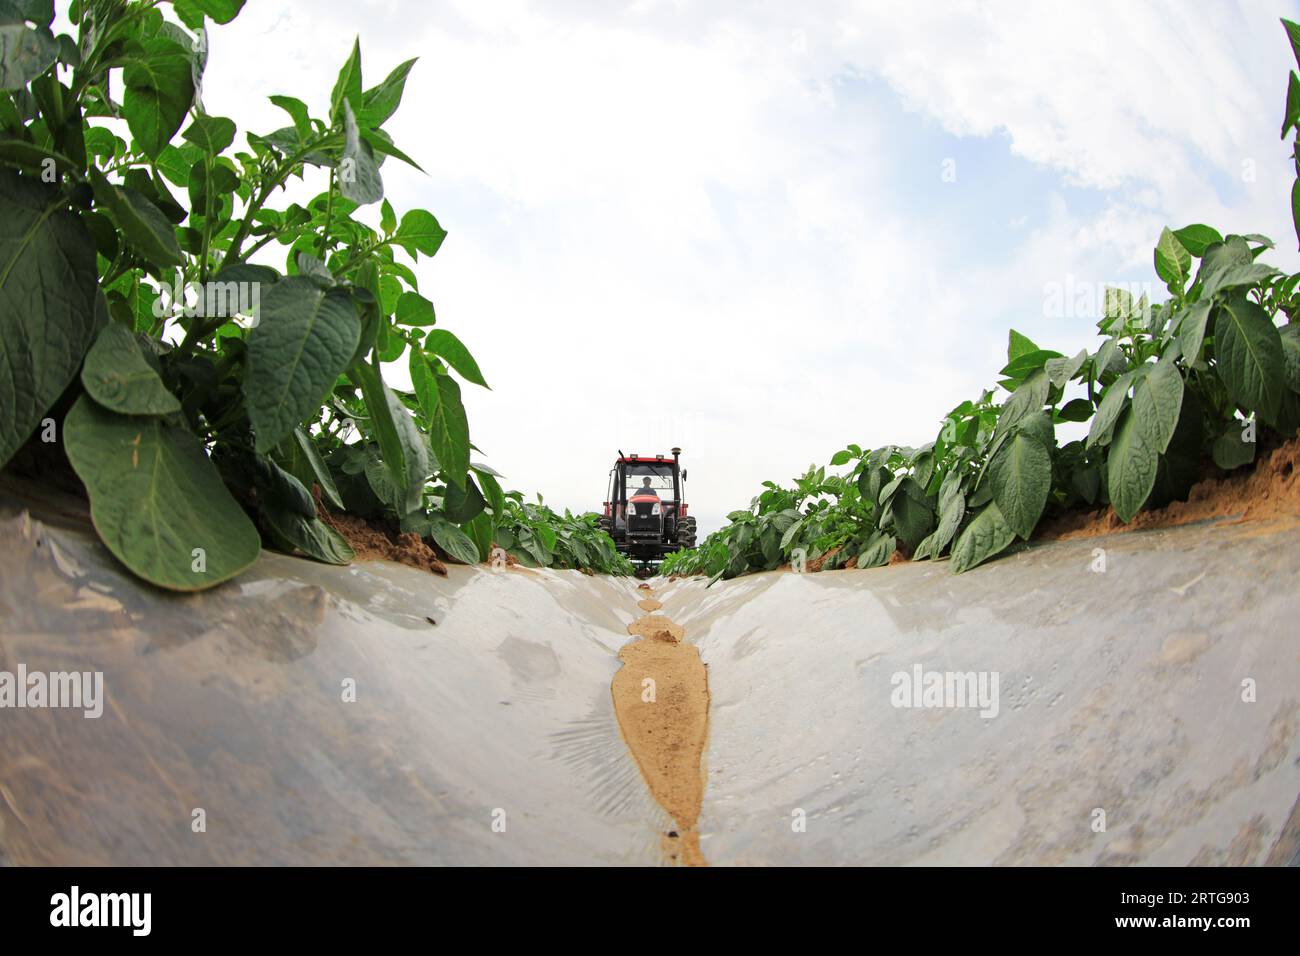 LUANNAN COUNTY, Hebei Province, China - May 5, 2019: Farmers drive tractors in potato fields and weed on farms. Stock Photo